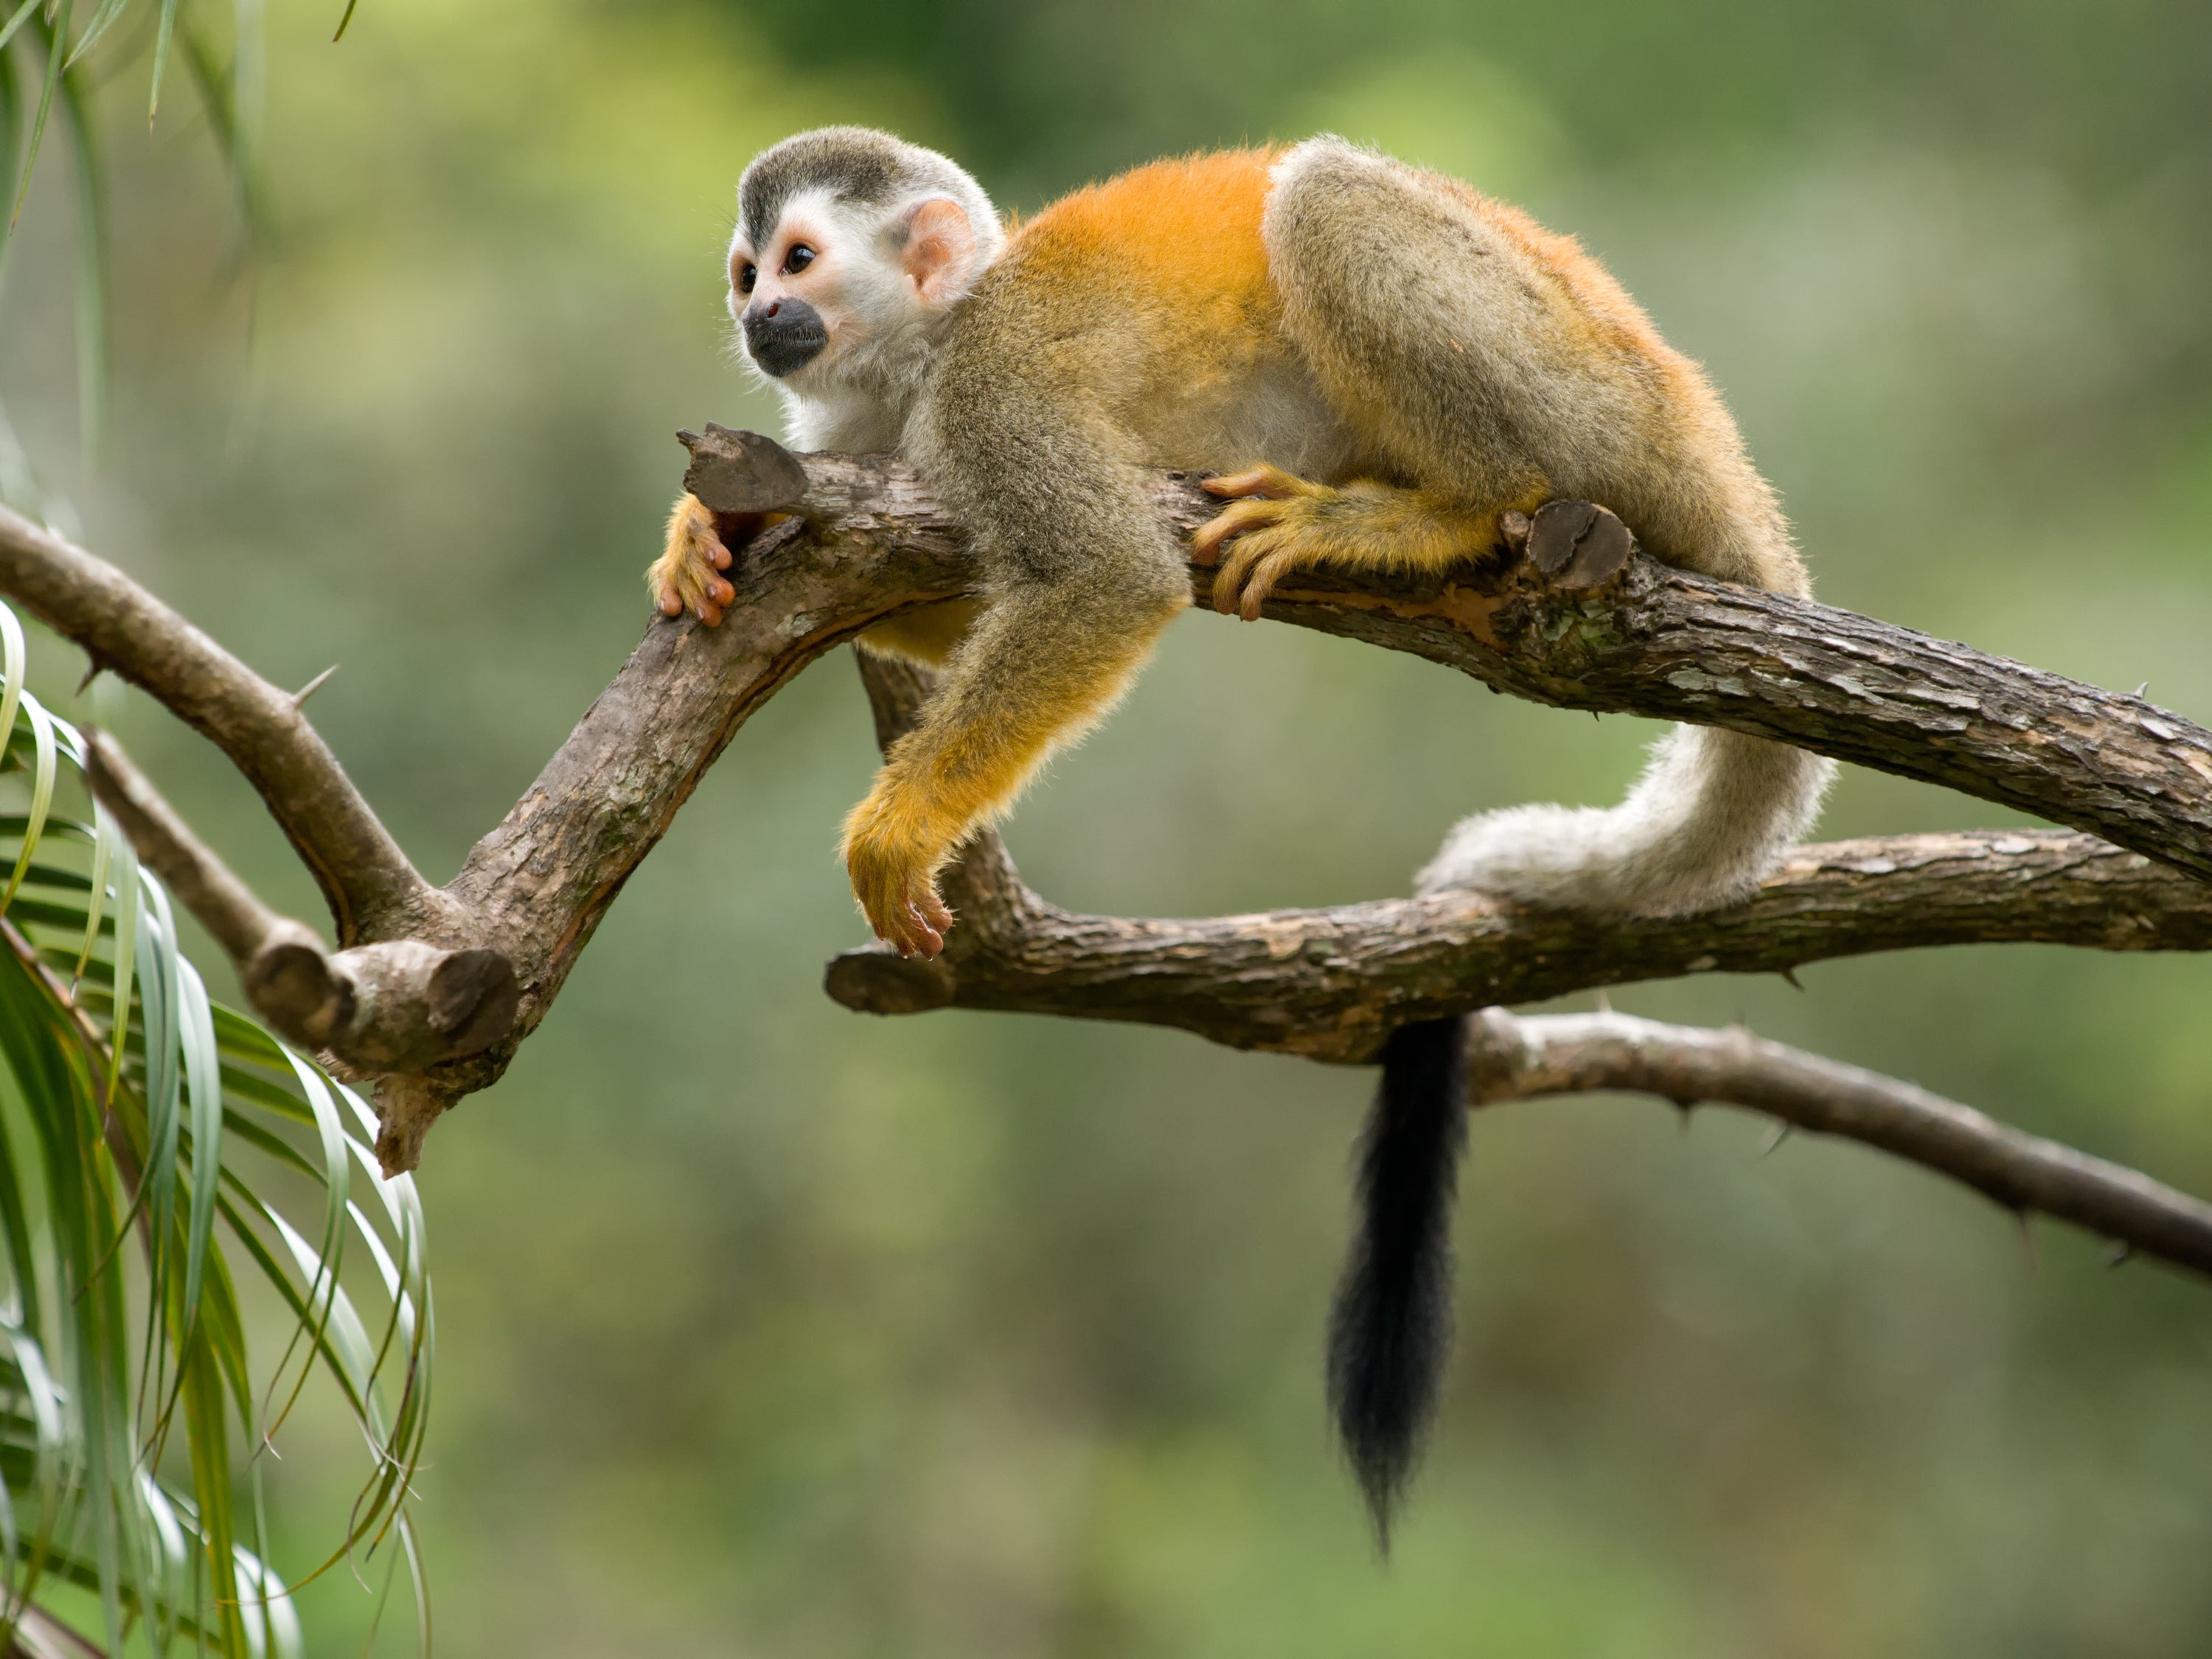 Casford attempted to steal a squirrel monkey in April 2018